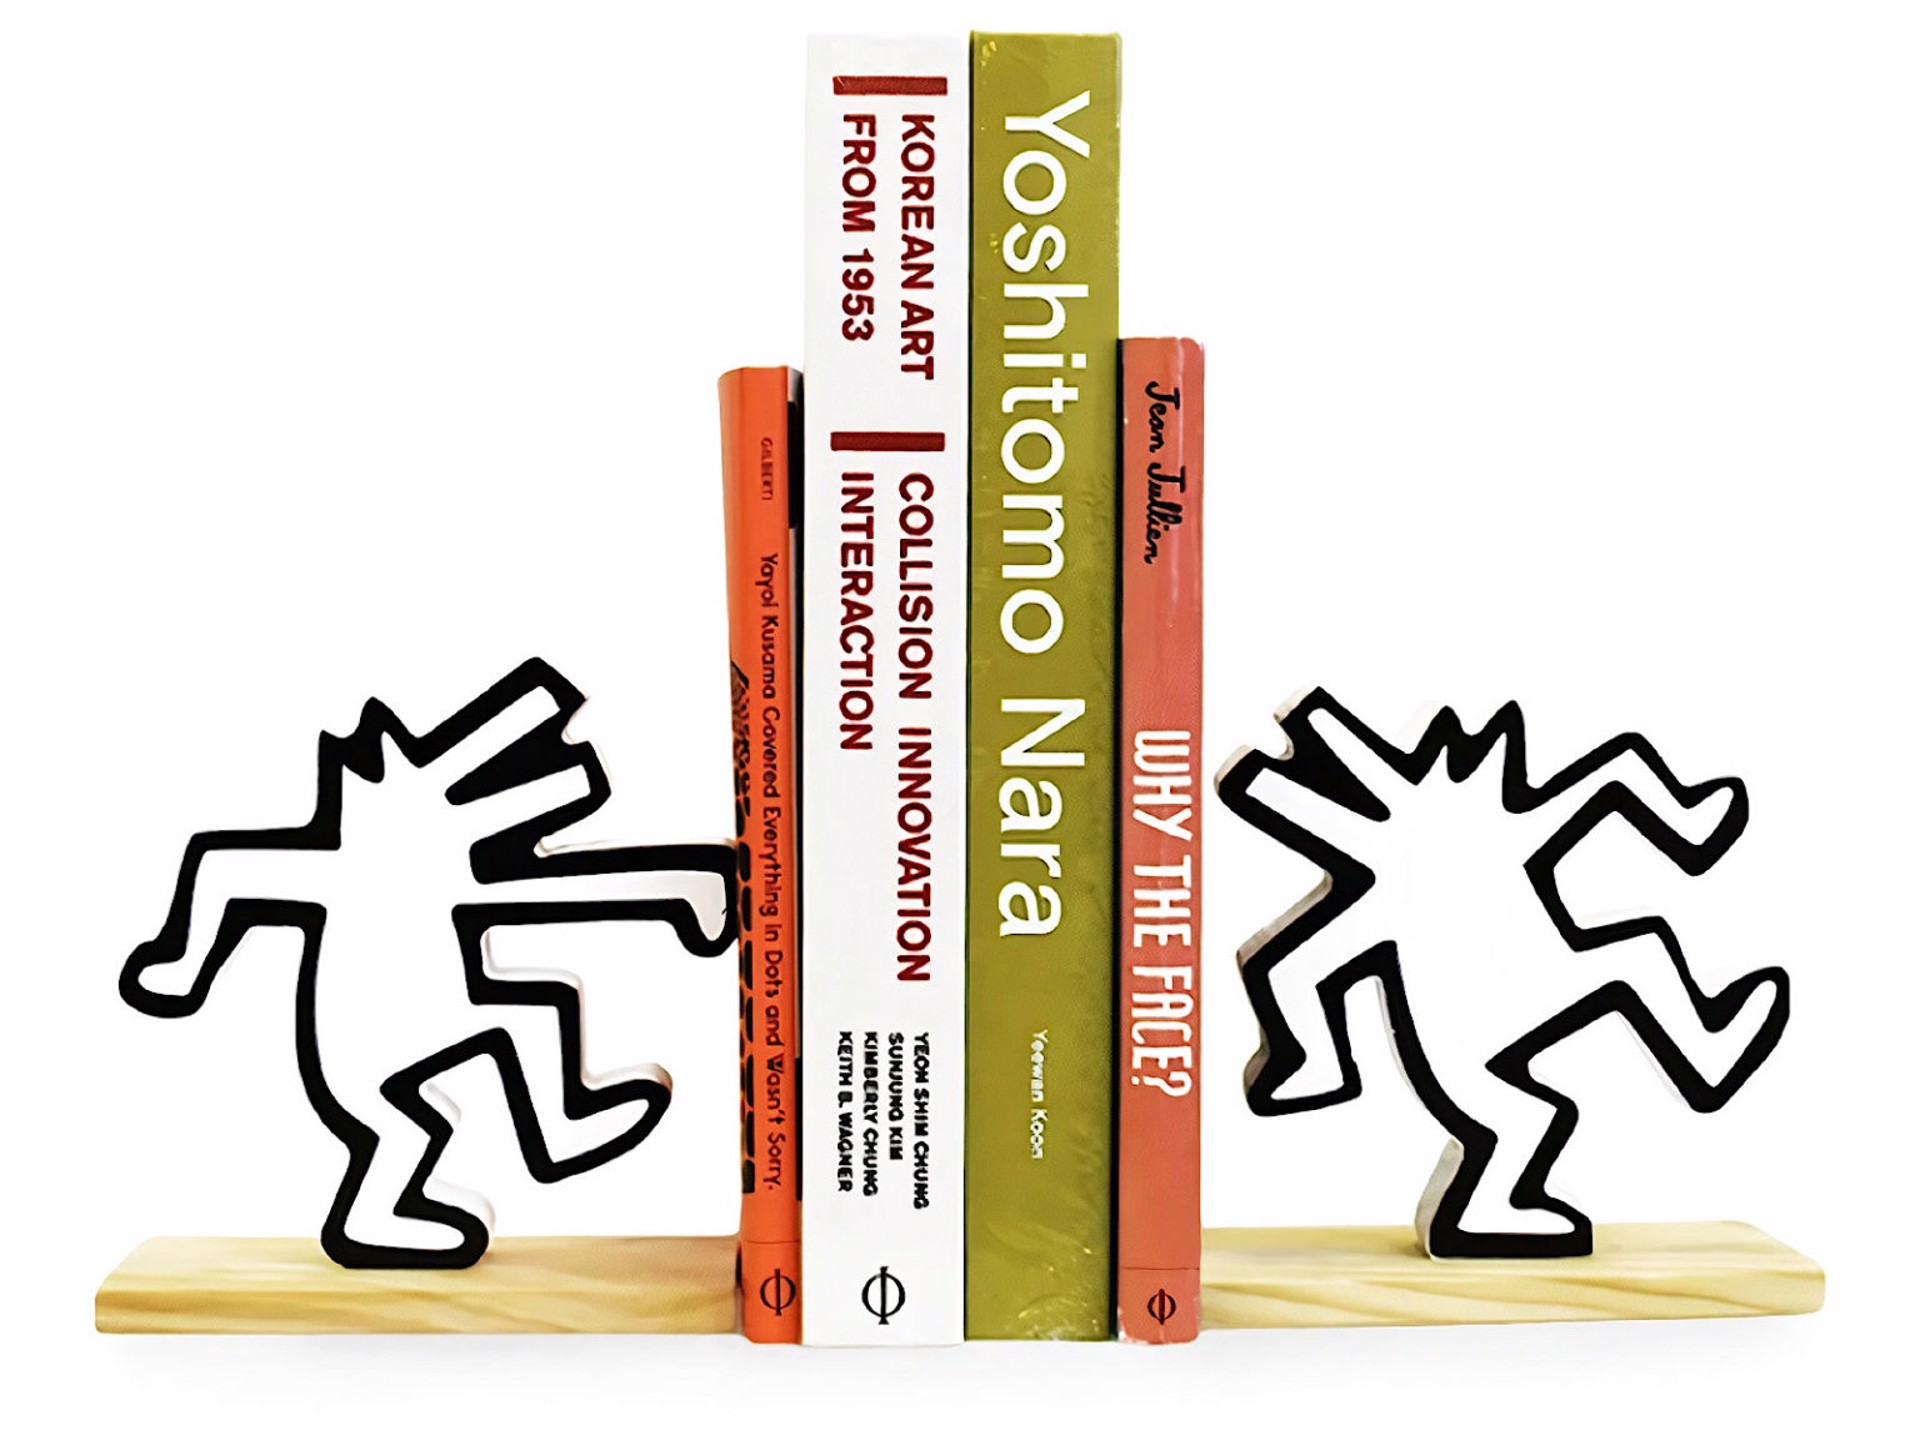 Keith Haring Bookends by Keith Haring